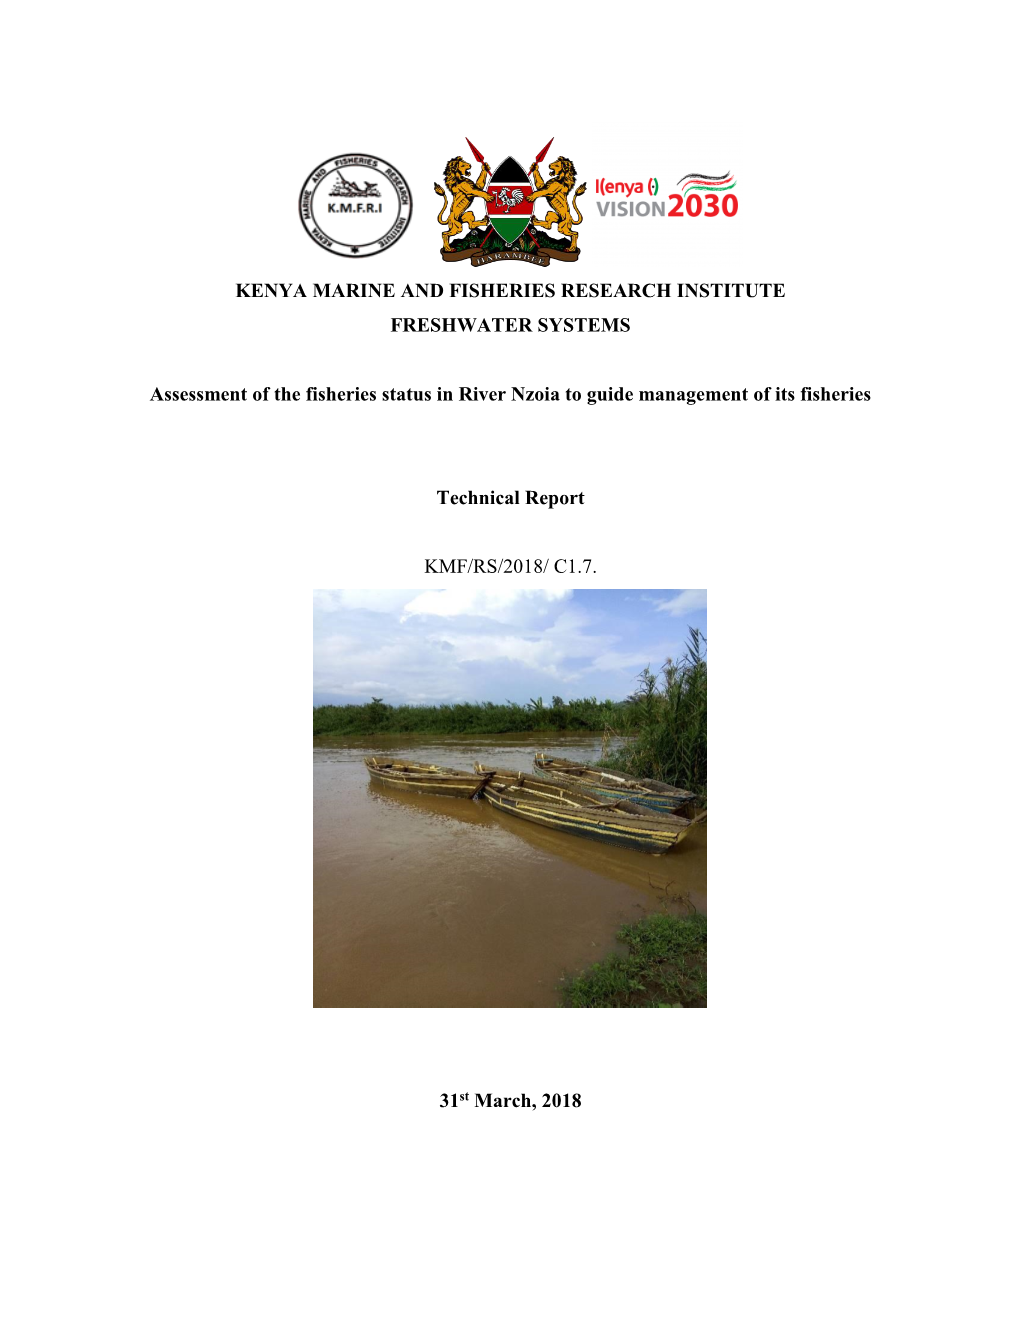 Assessment of the Fisheries Status in River Nzoia to Guide Management of Its Fisheries